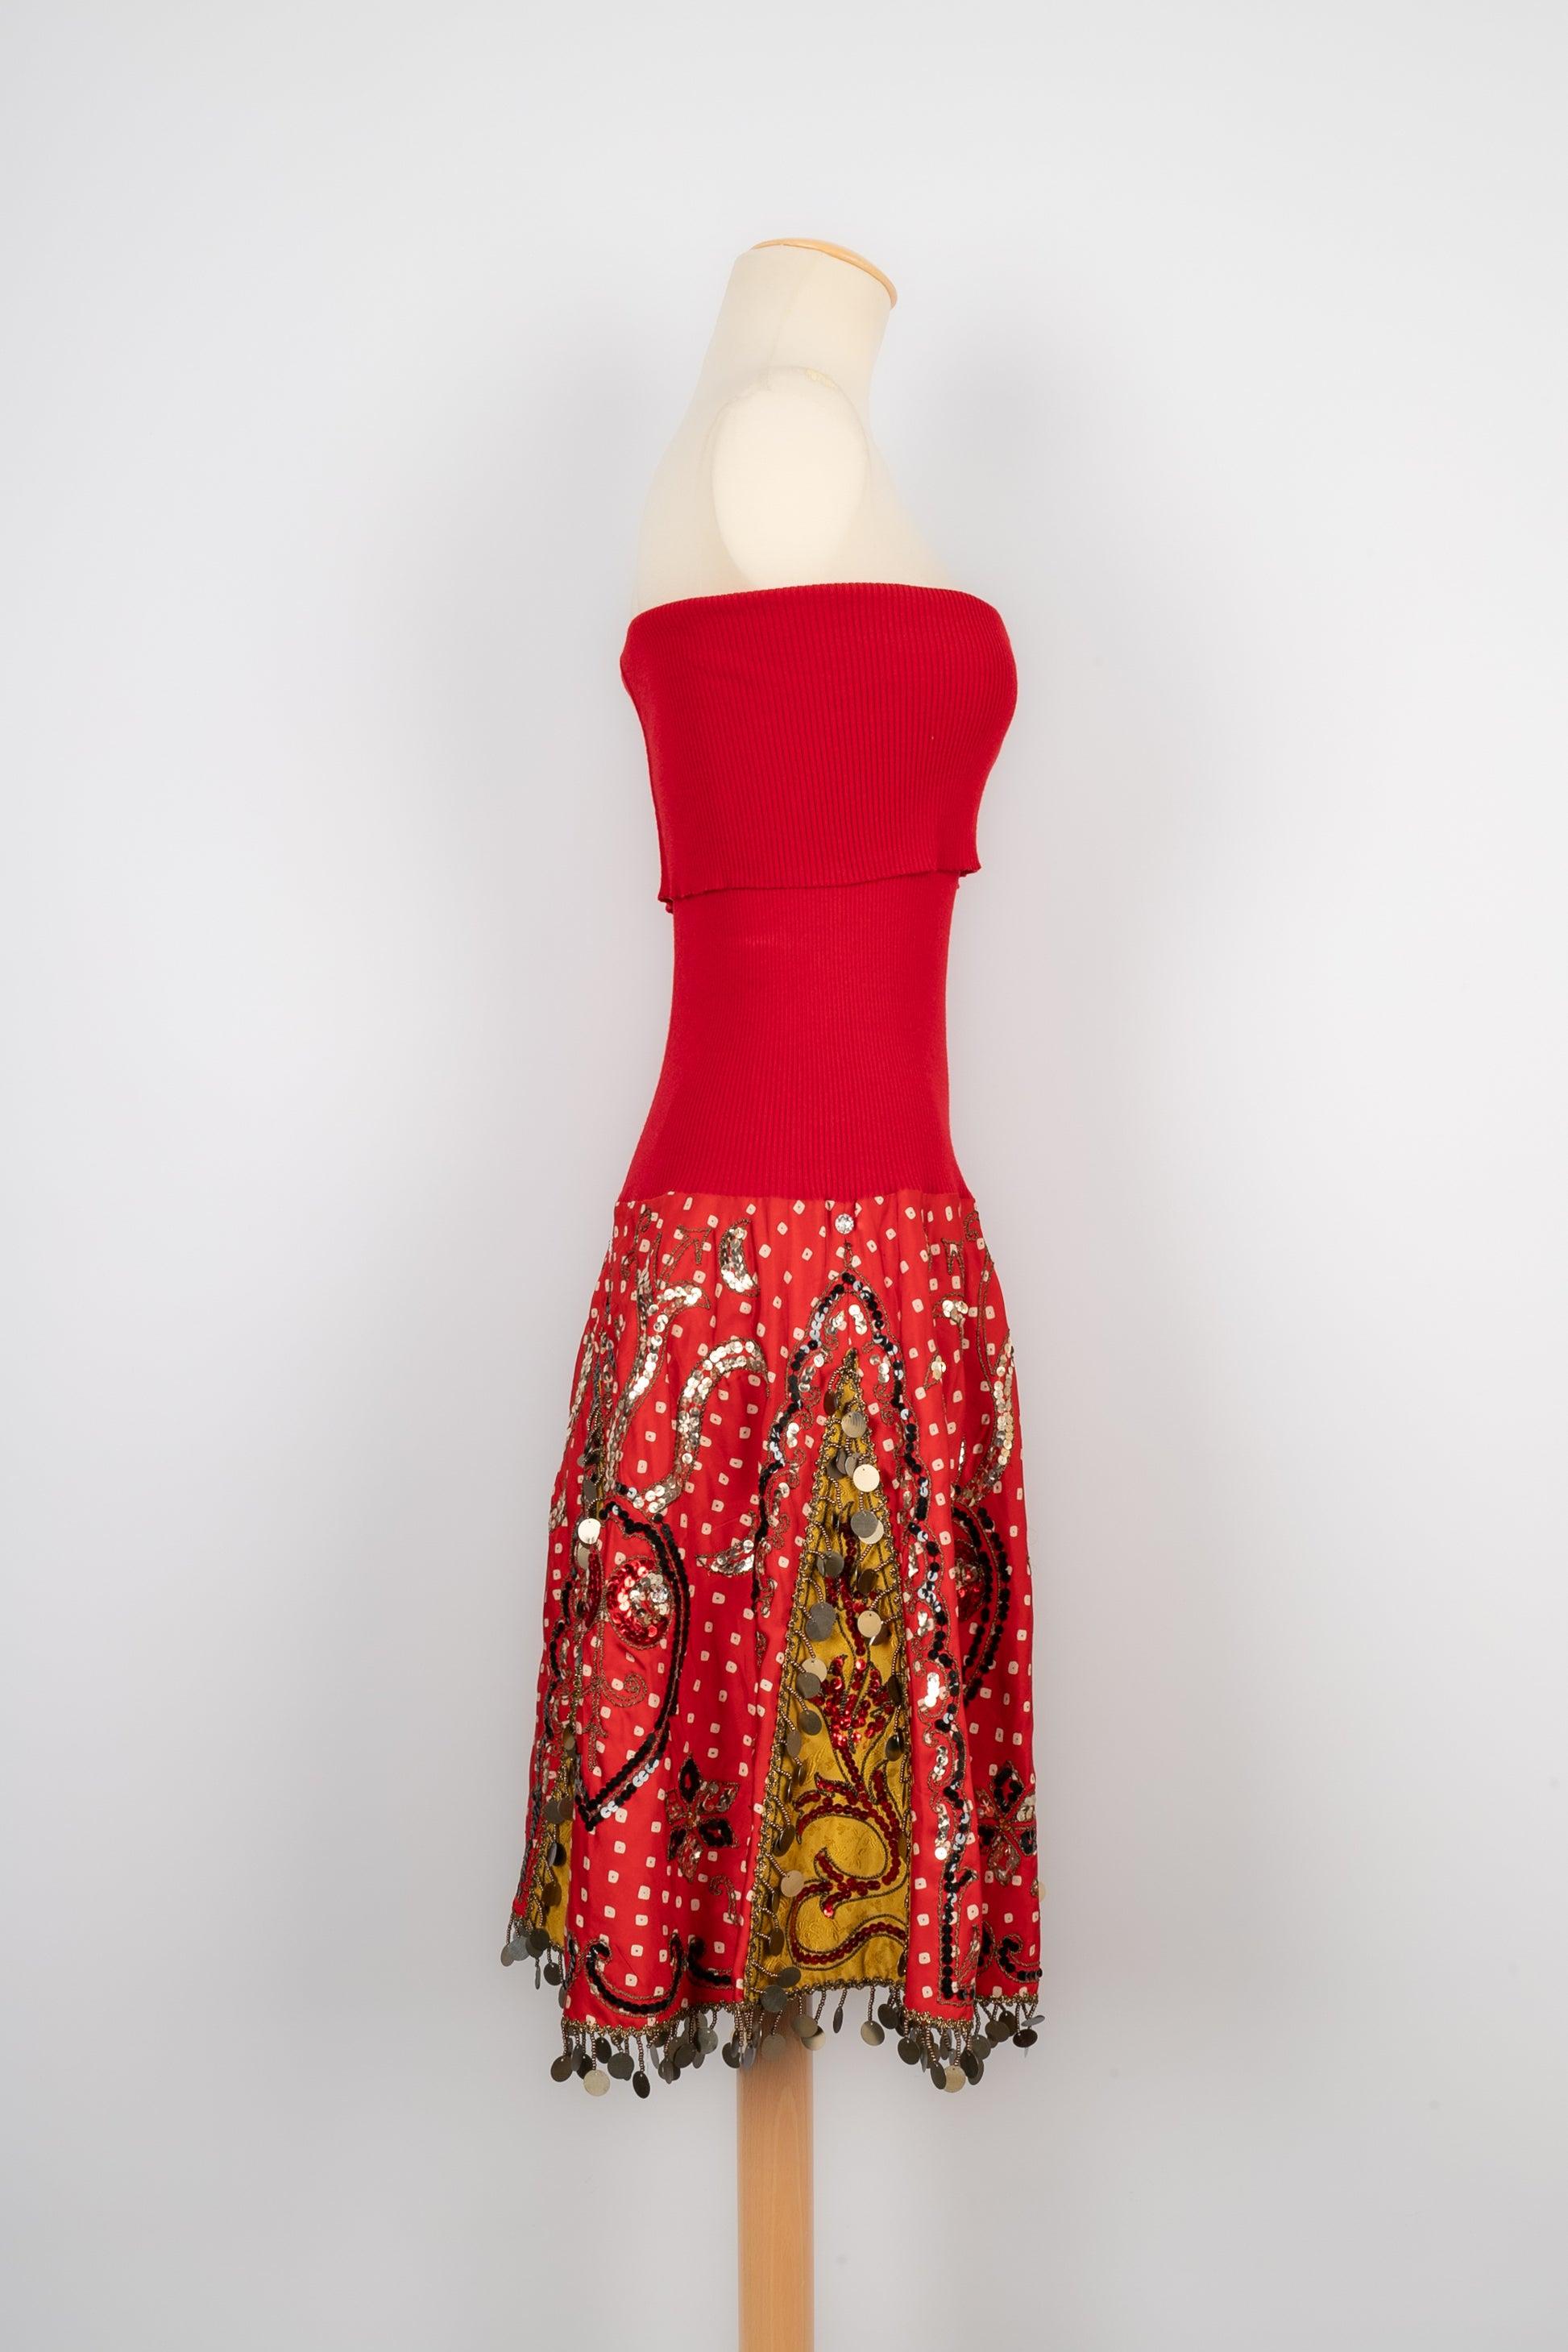 Christian Dior Red Mesh and Silk Skirt/dress, 2002 In Excellent Condition For Sale In SAINT-OUEN-SUR-SEINE, FR